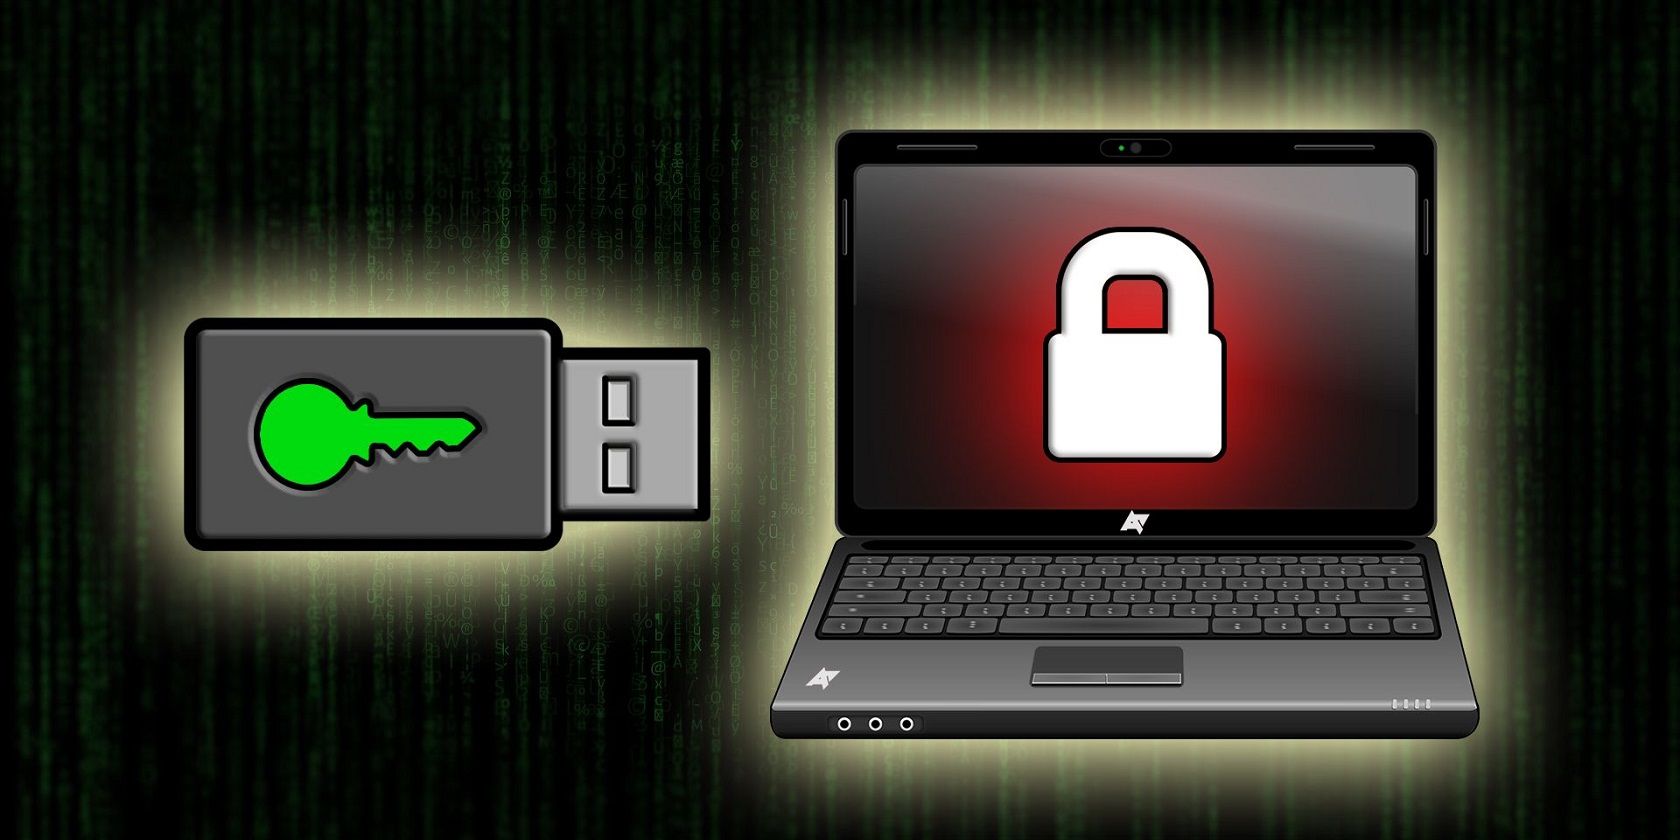 Image shows a usb with a key logo on it pointing toward a computer with a lock logo on it. Matrix designs linger in the background.